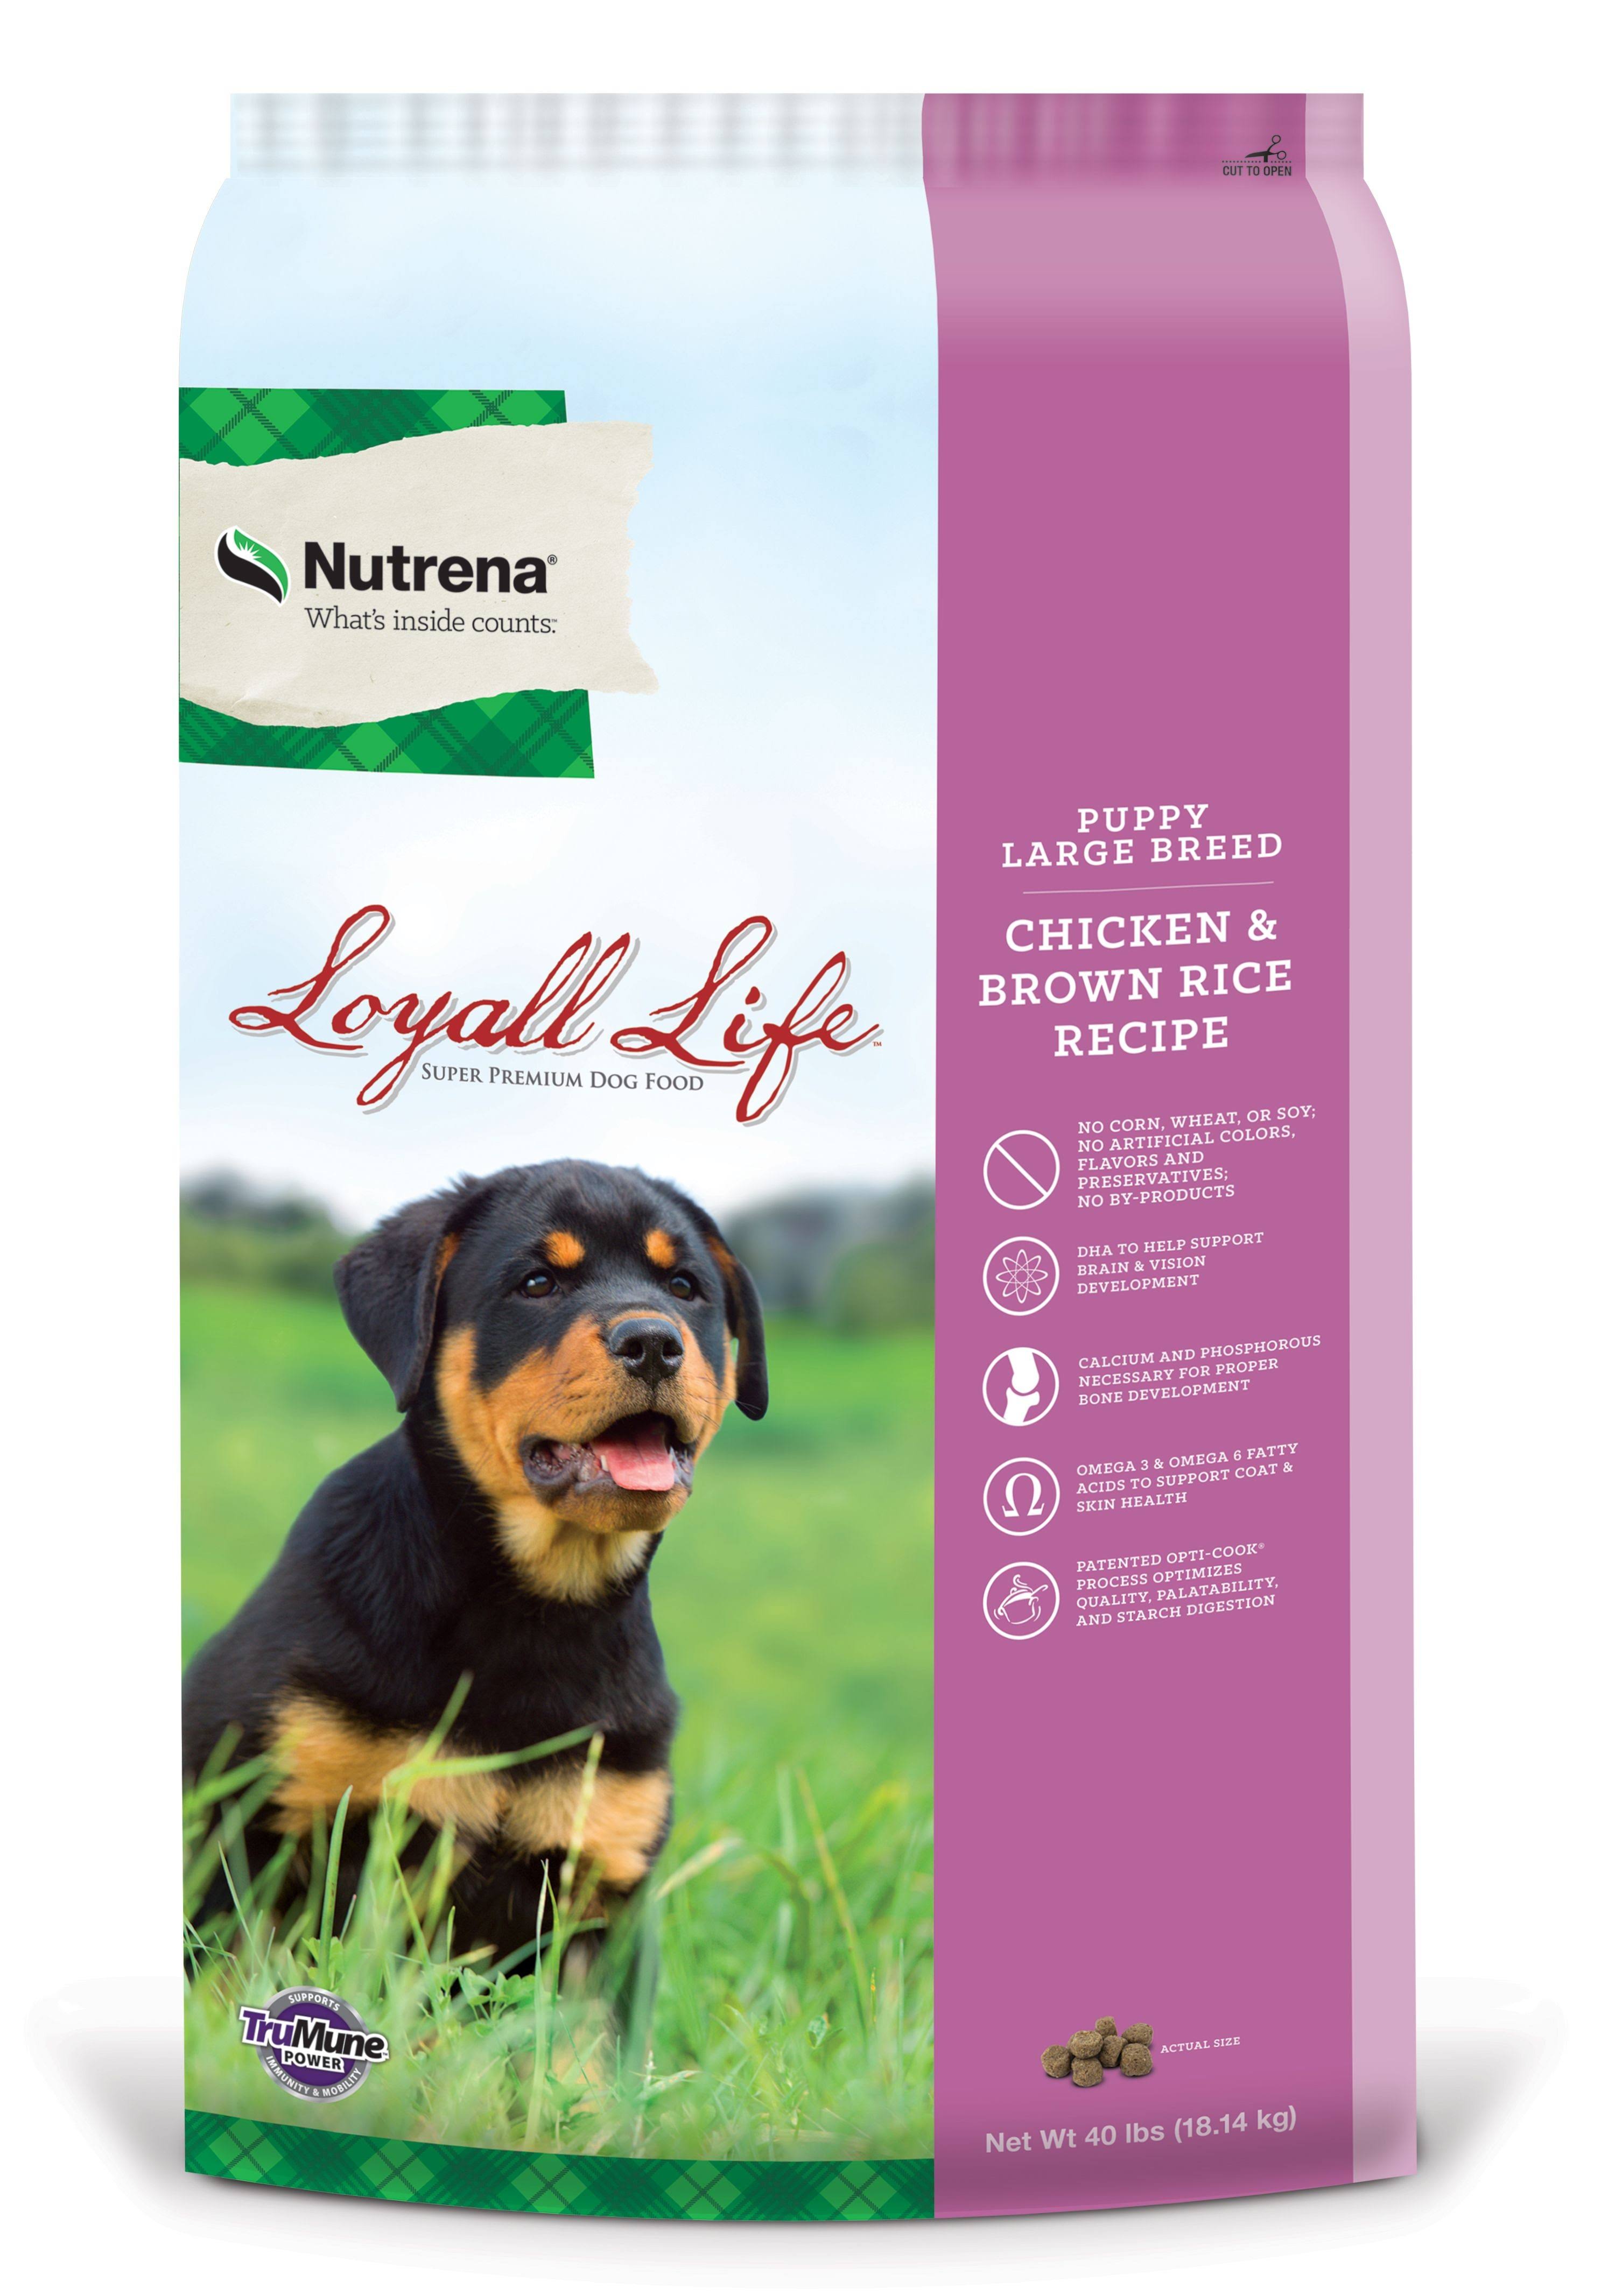 Nutrena Loyall Life Premium Dog Food - Large Breed Puppy, Chicken & Rice, 40lbs